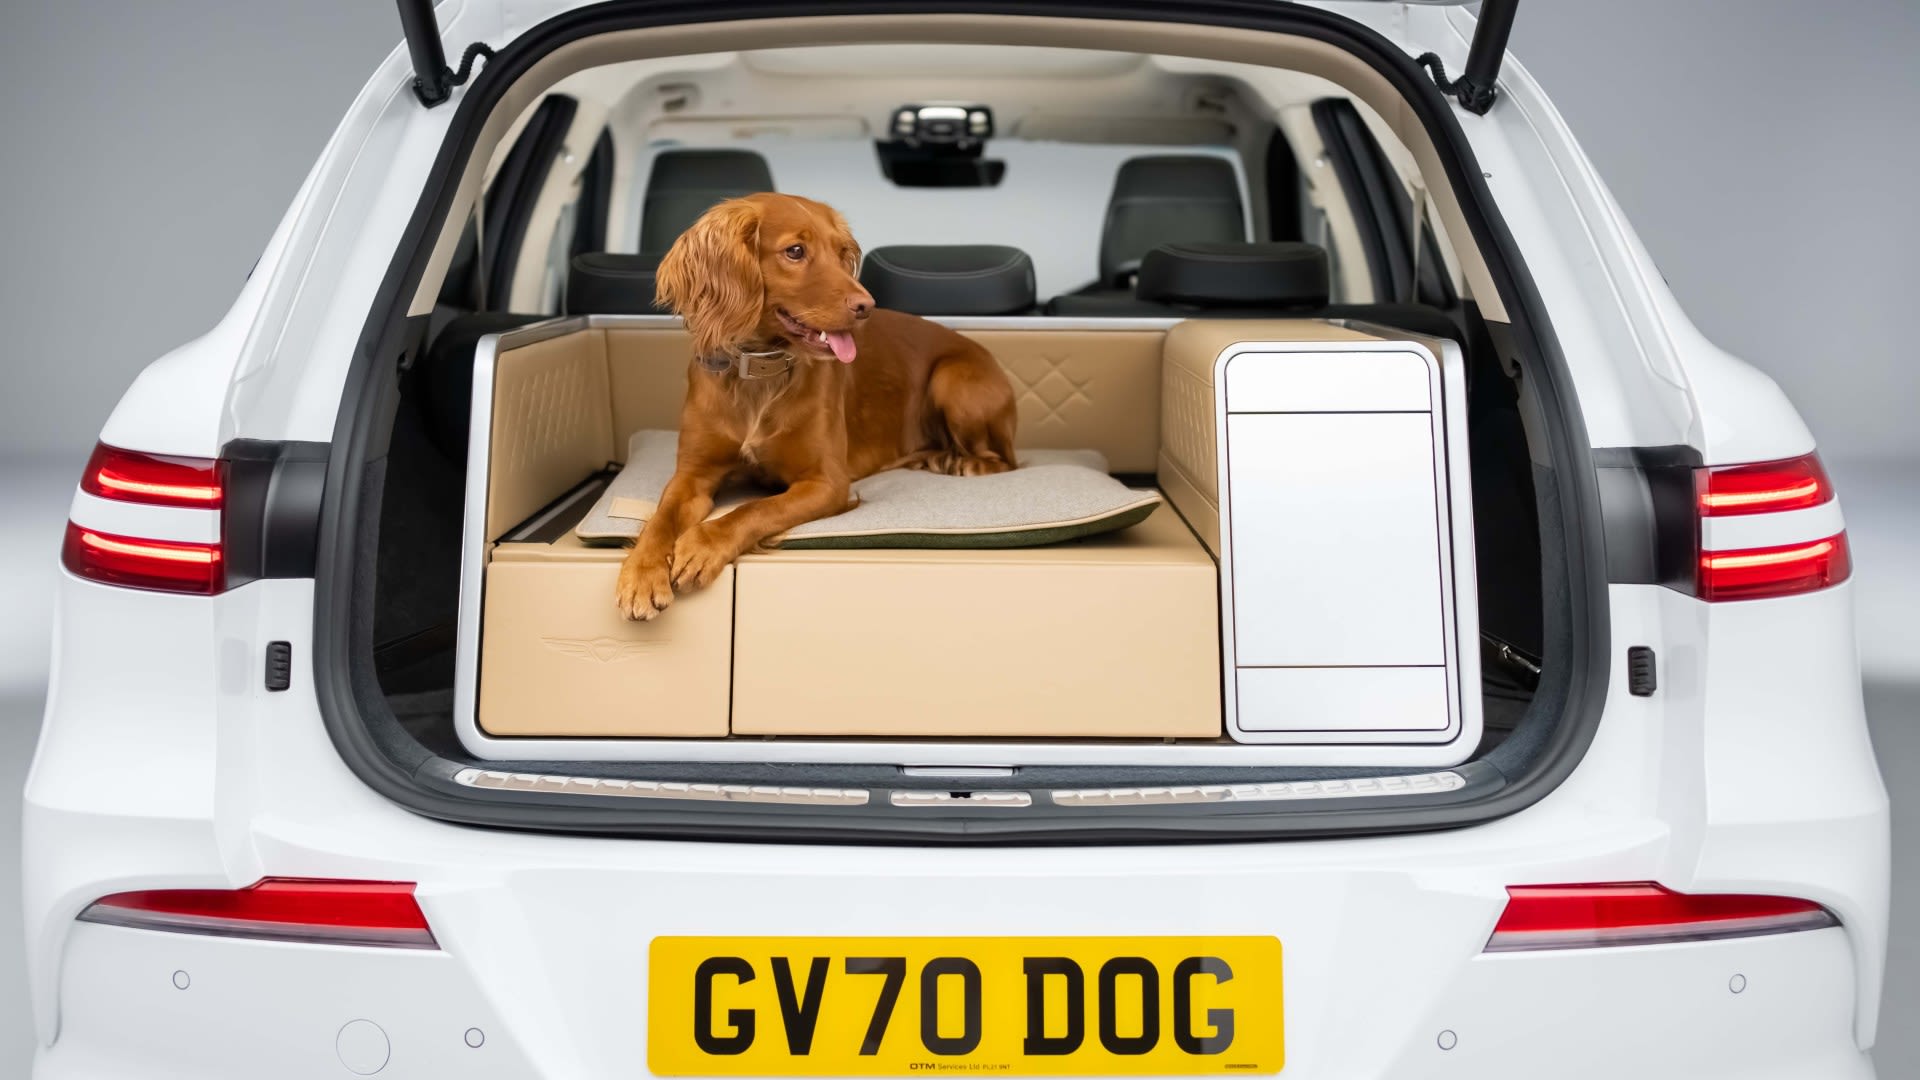 New dog-friendly car for pooches with luxury built-in shower and heated bed